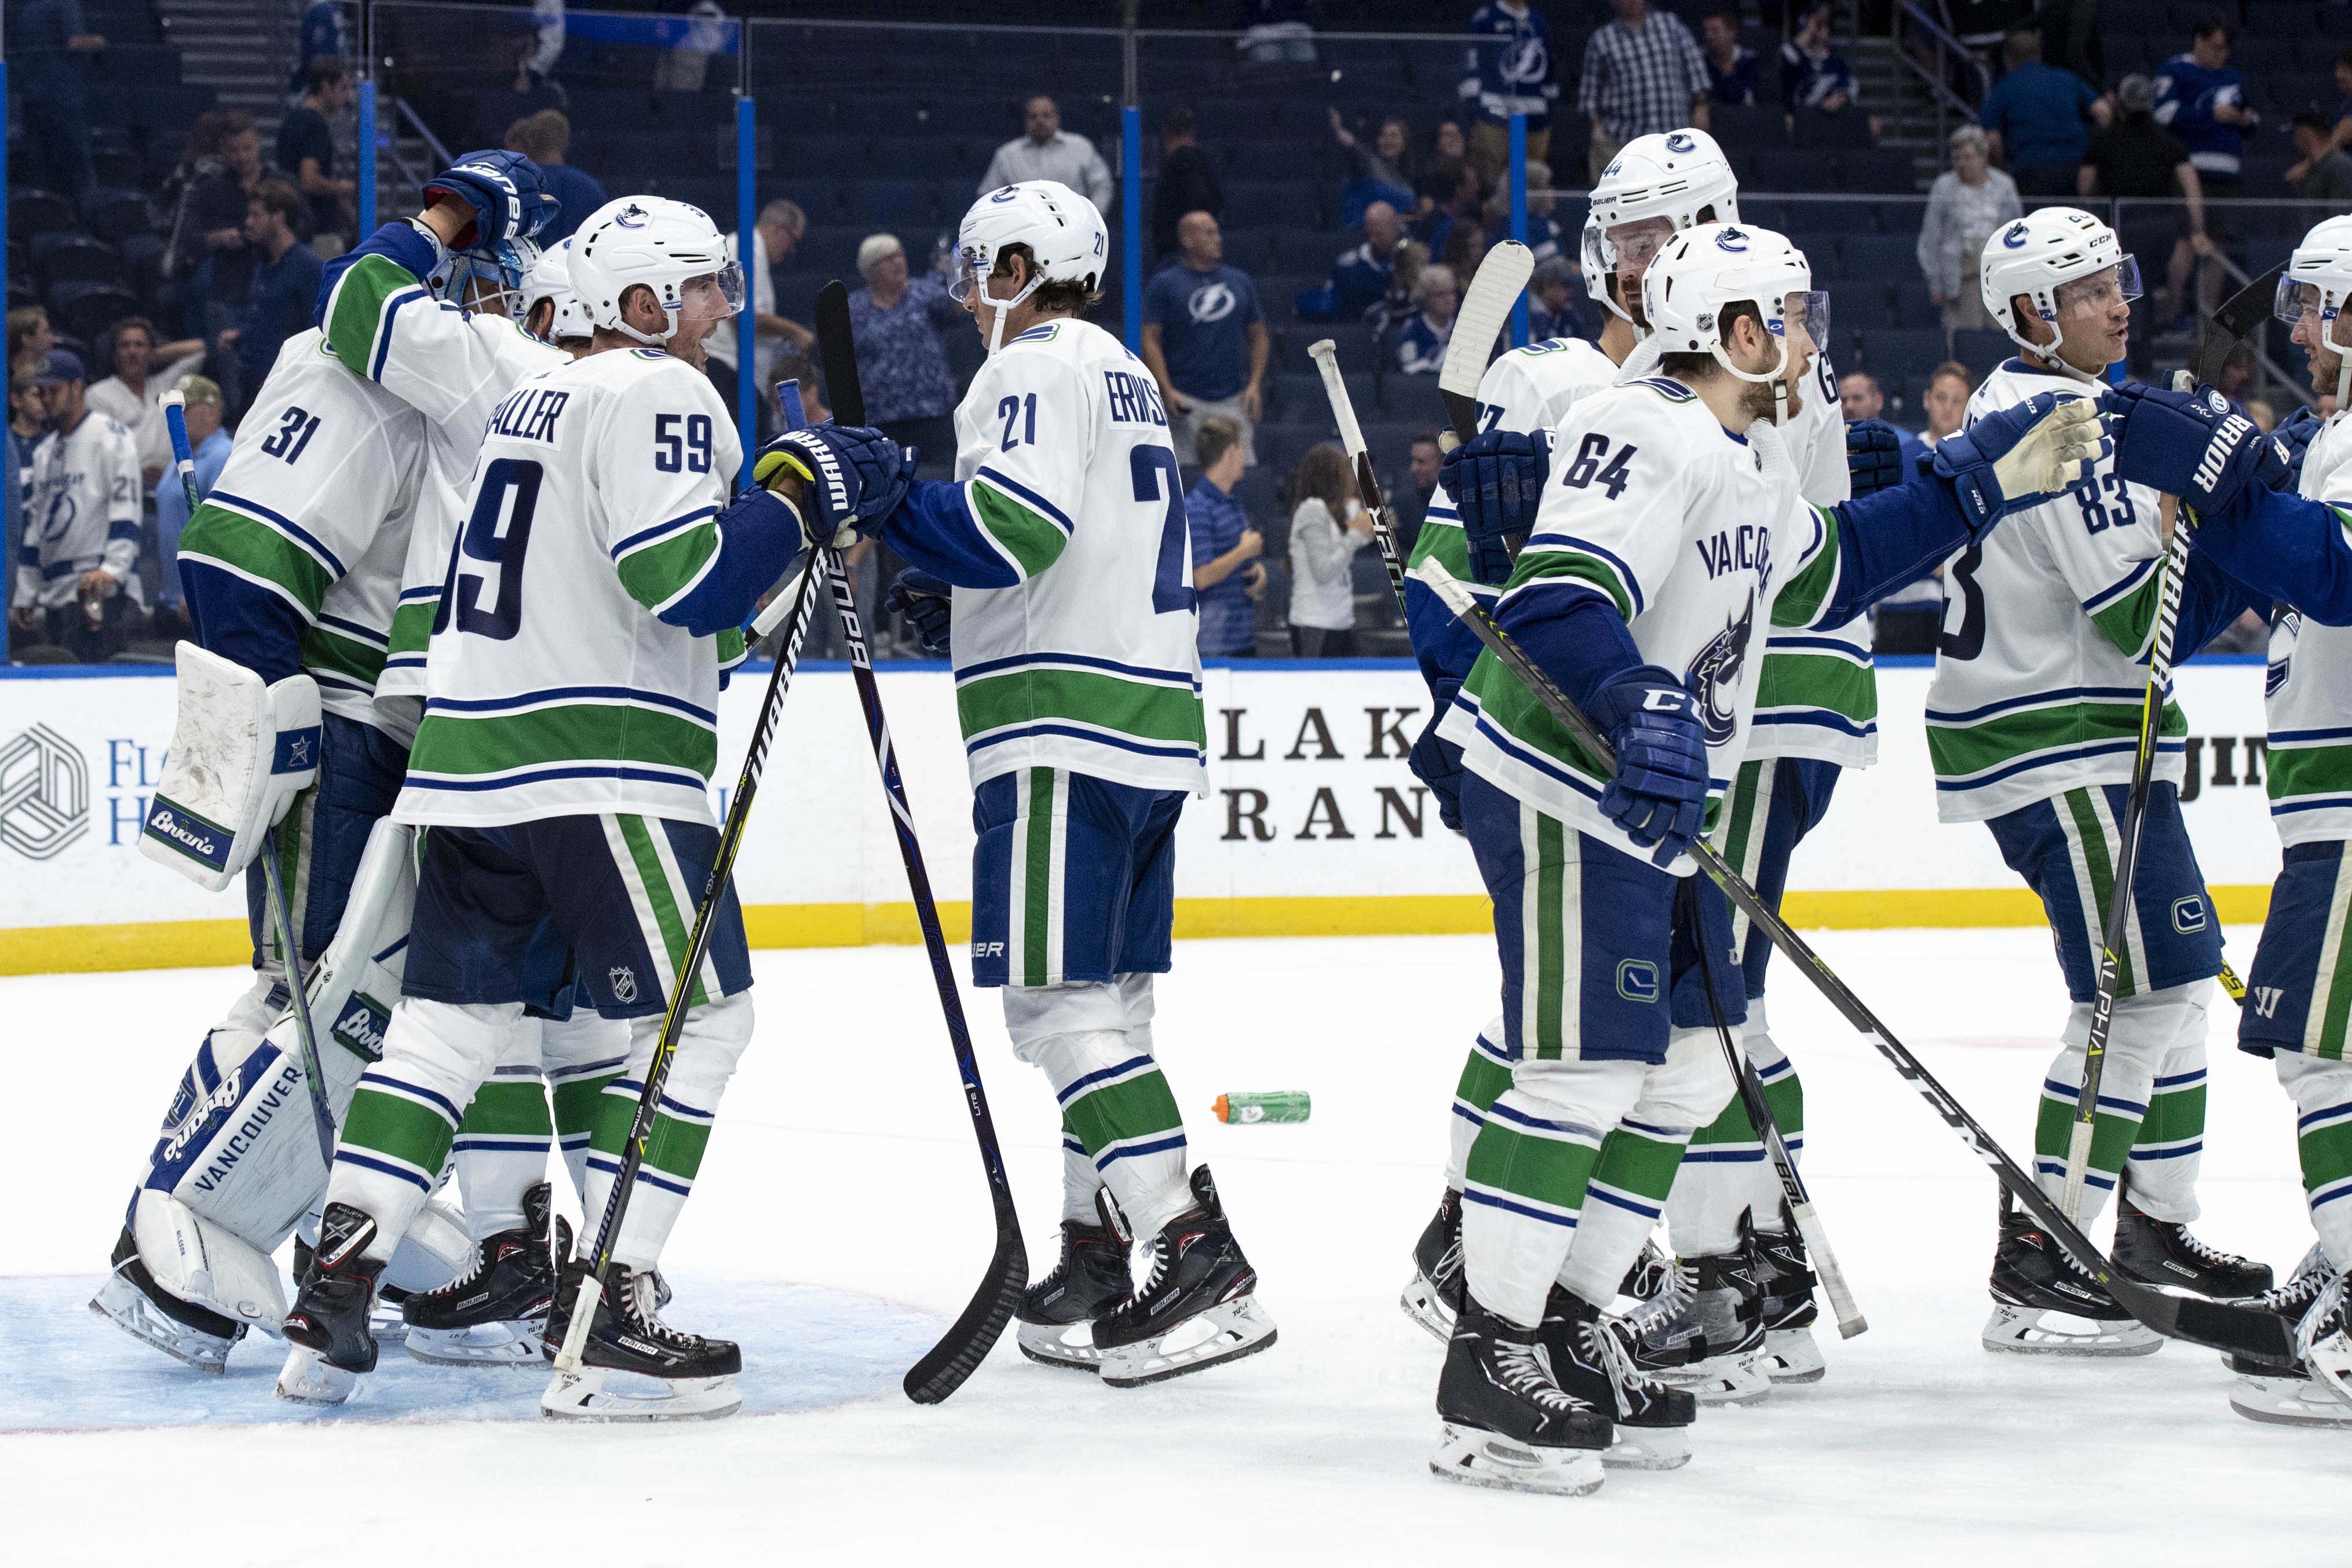 Oct 11, 2018; Tampa, FL, USA; Vancouver Canucks goalie Anders Nilsson (31) is congratulated by his teammates after the game between the Vancouver Canucks and Tampa Bay Lightning at Amalie Arena. Mandatory Credit: Douglas DeFelice